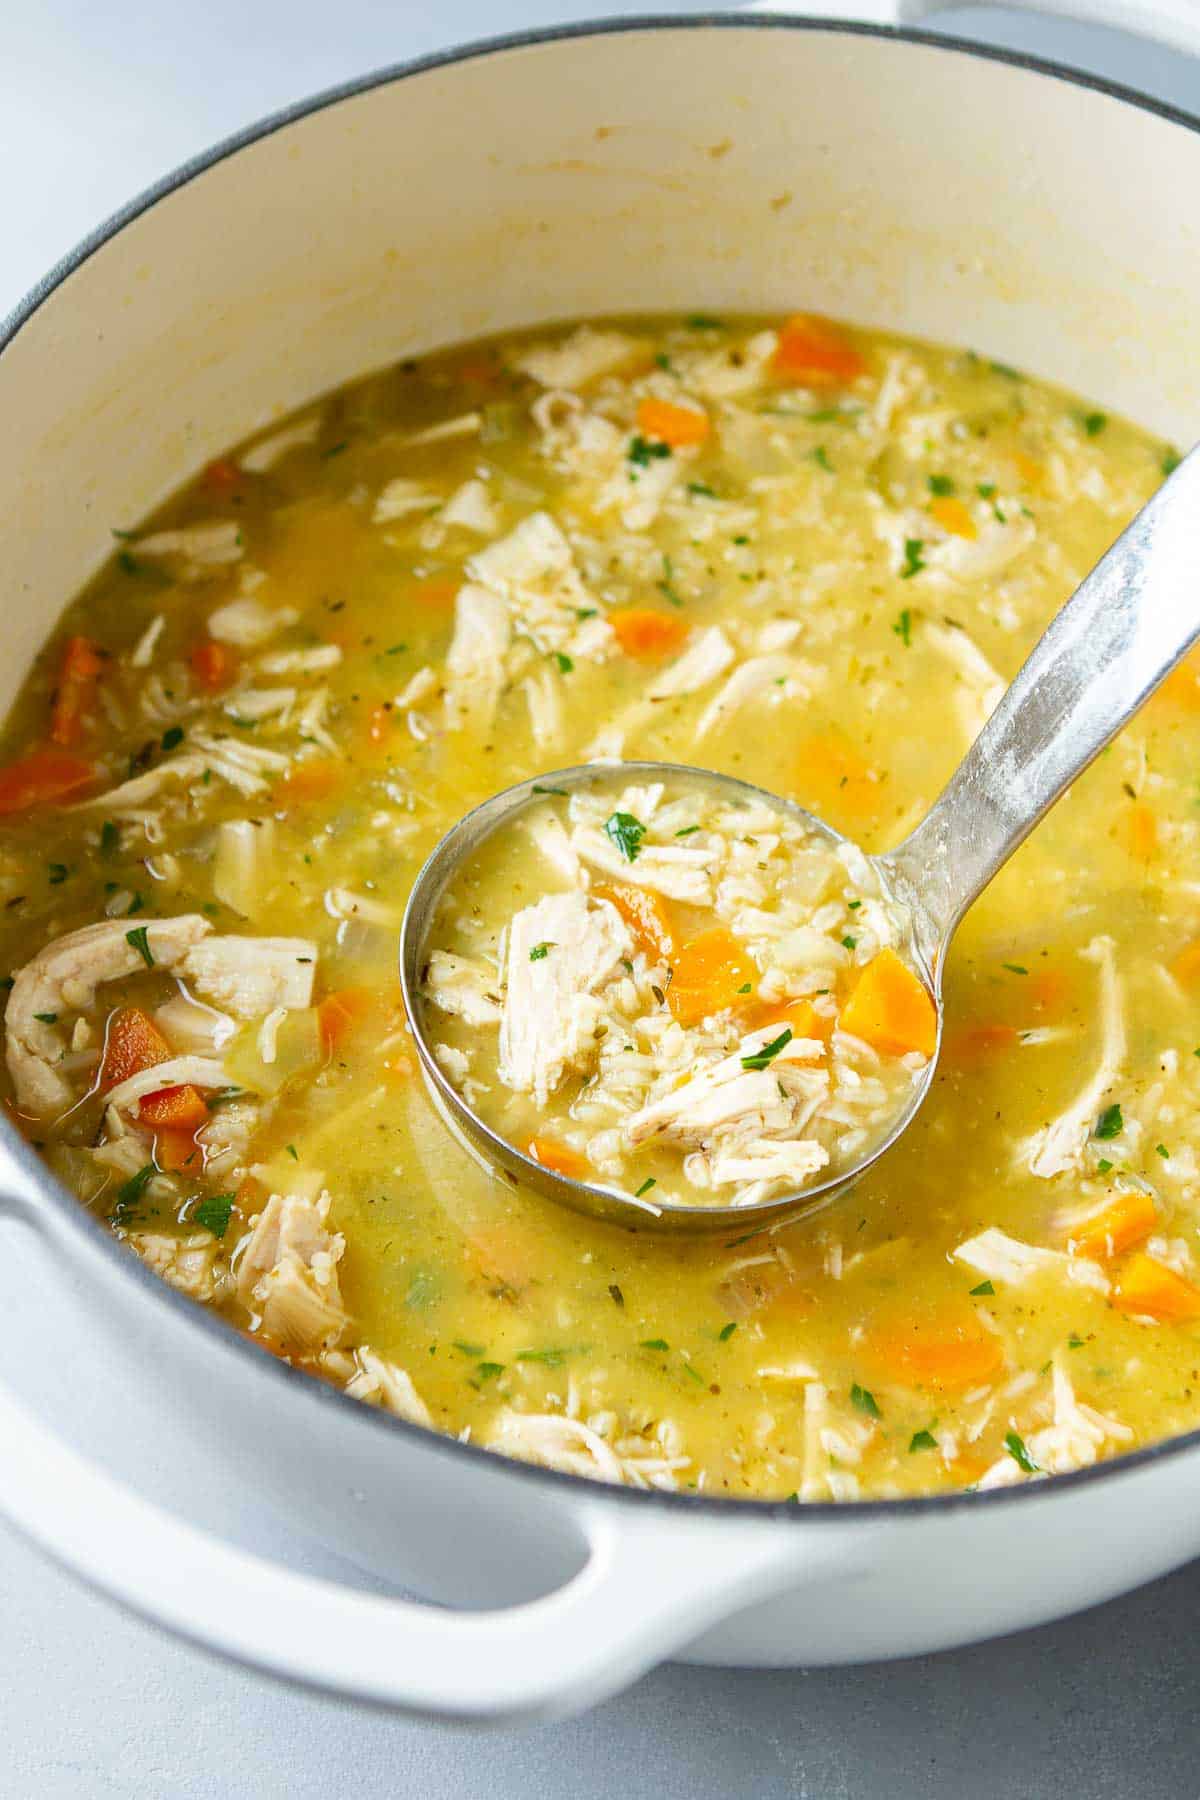 A ladle dipping into a white saucepan full of turkey rice soup.